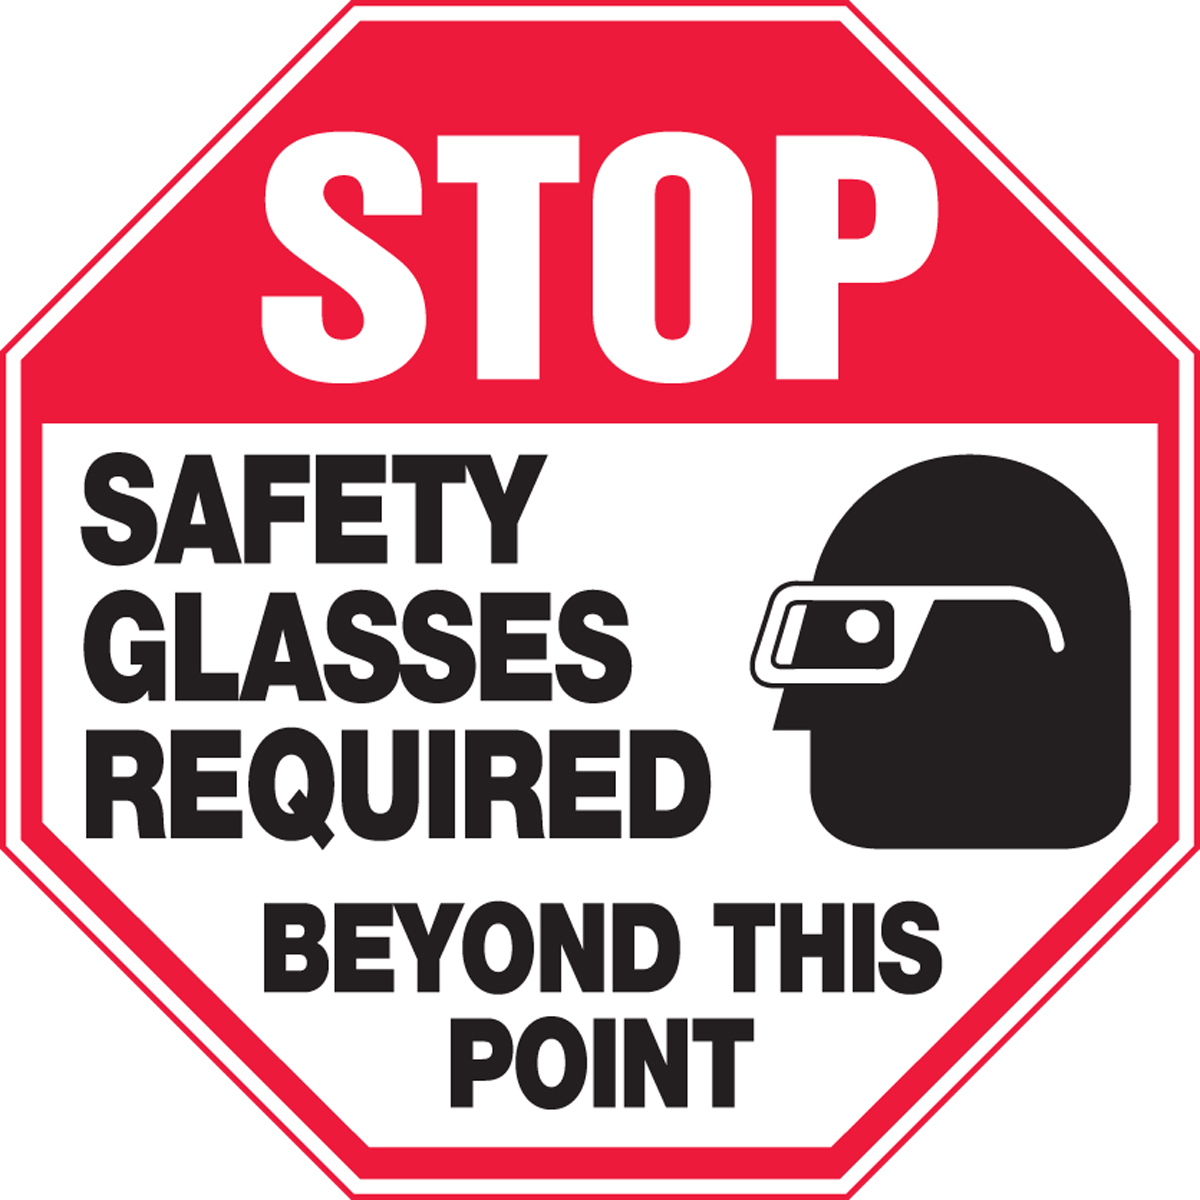 STOP SAFETY GLASSES REQUIRED BEYOND THIS POINT (W/GRAPHIC)